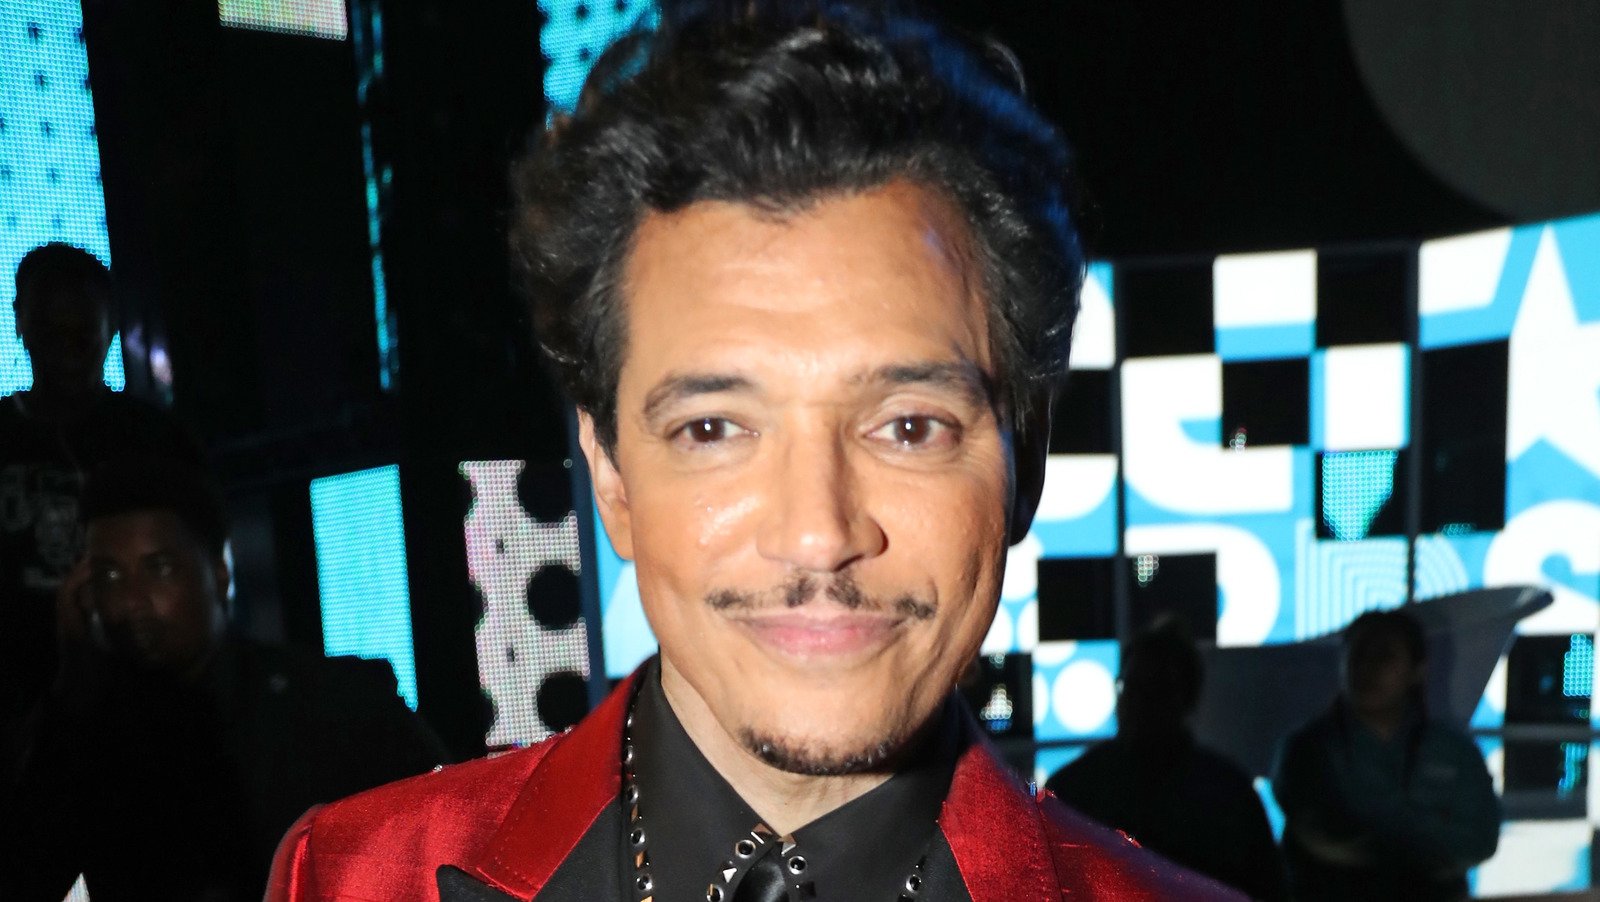 Details You Didn't Know About El Debarge - Grunge